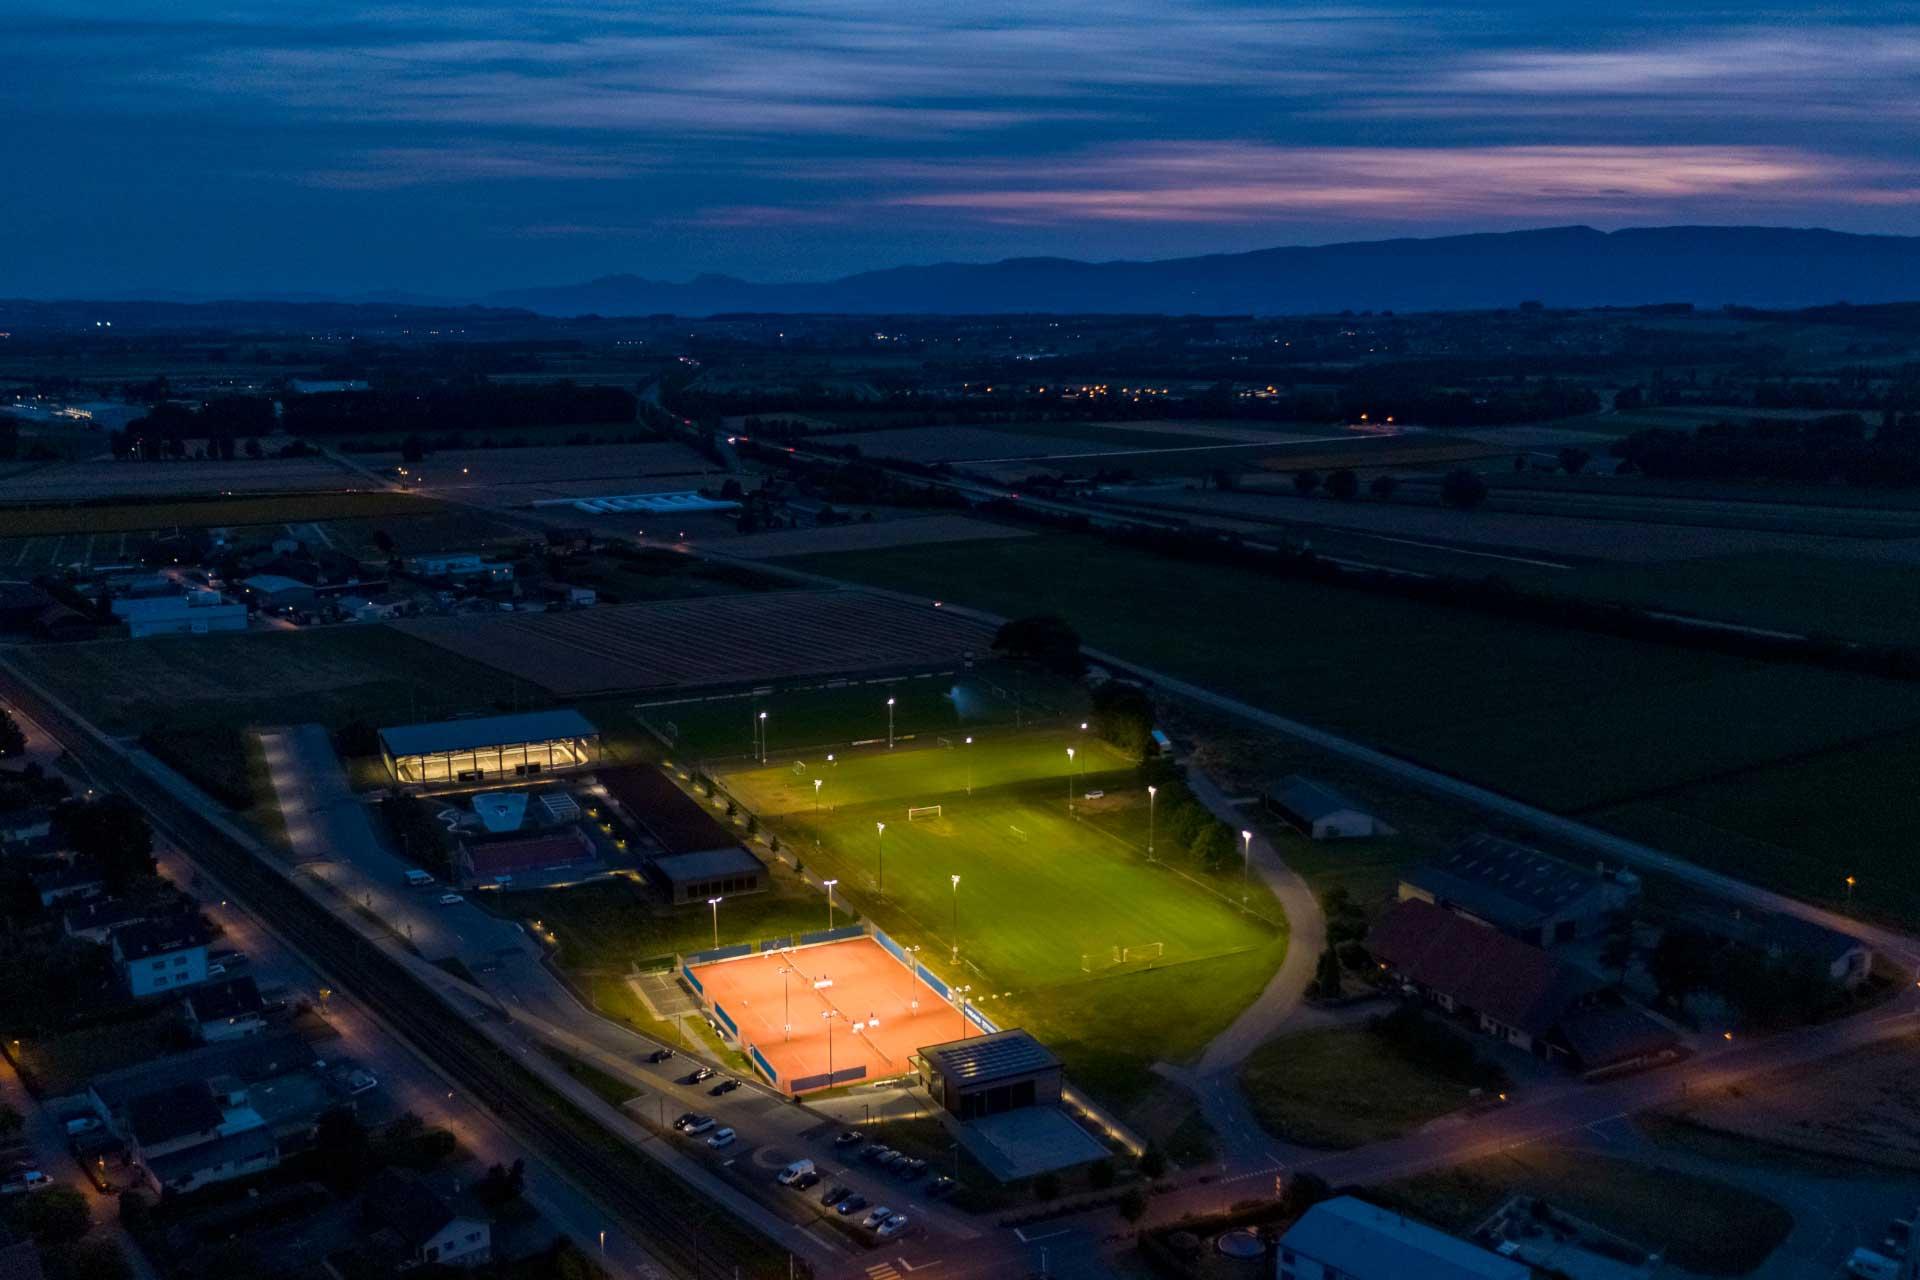 OMNIstar floodlights light FC Avenches football pitch with zero light spill, preserving the night sky